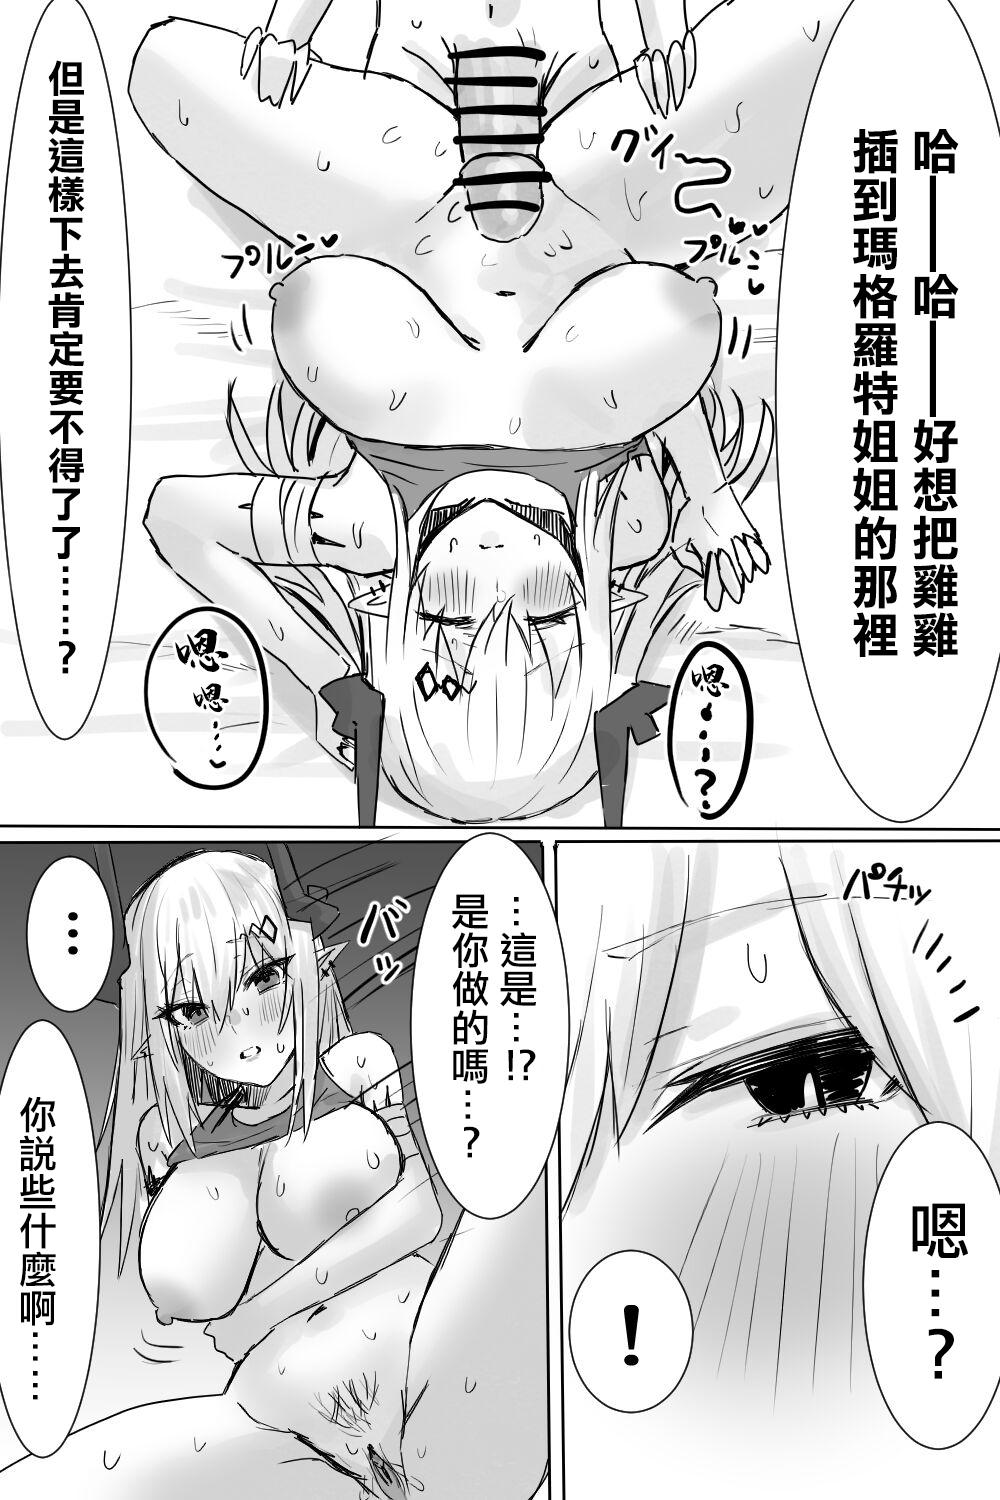 Thong マドロックが保護した子供に… - Arknights Clothed - Page 4